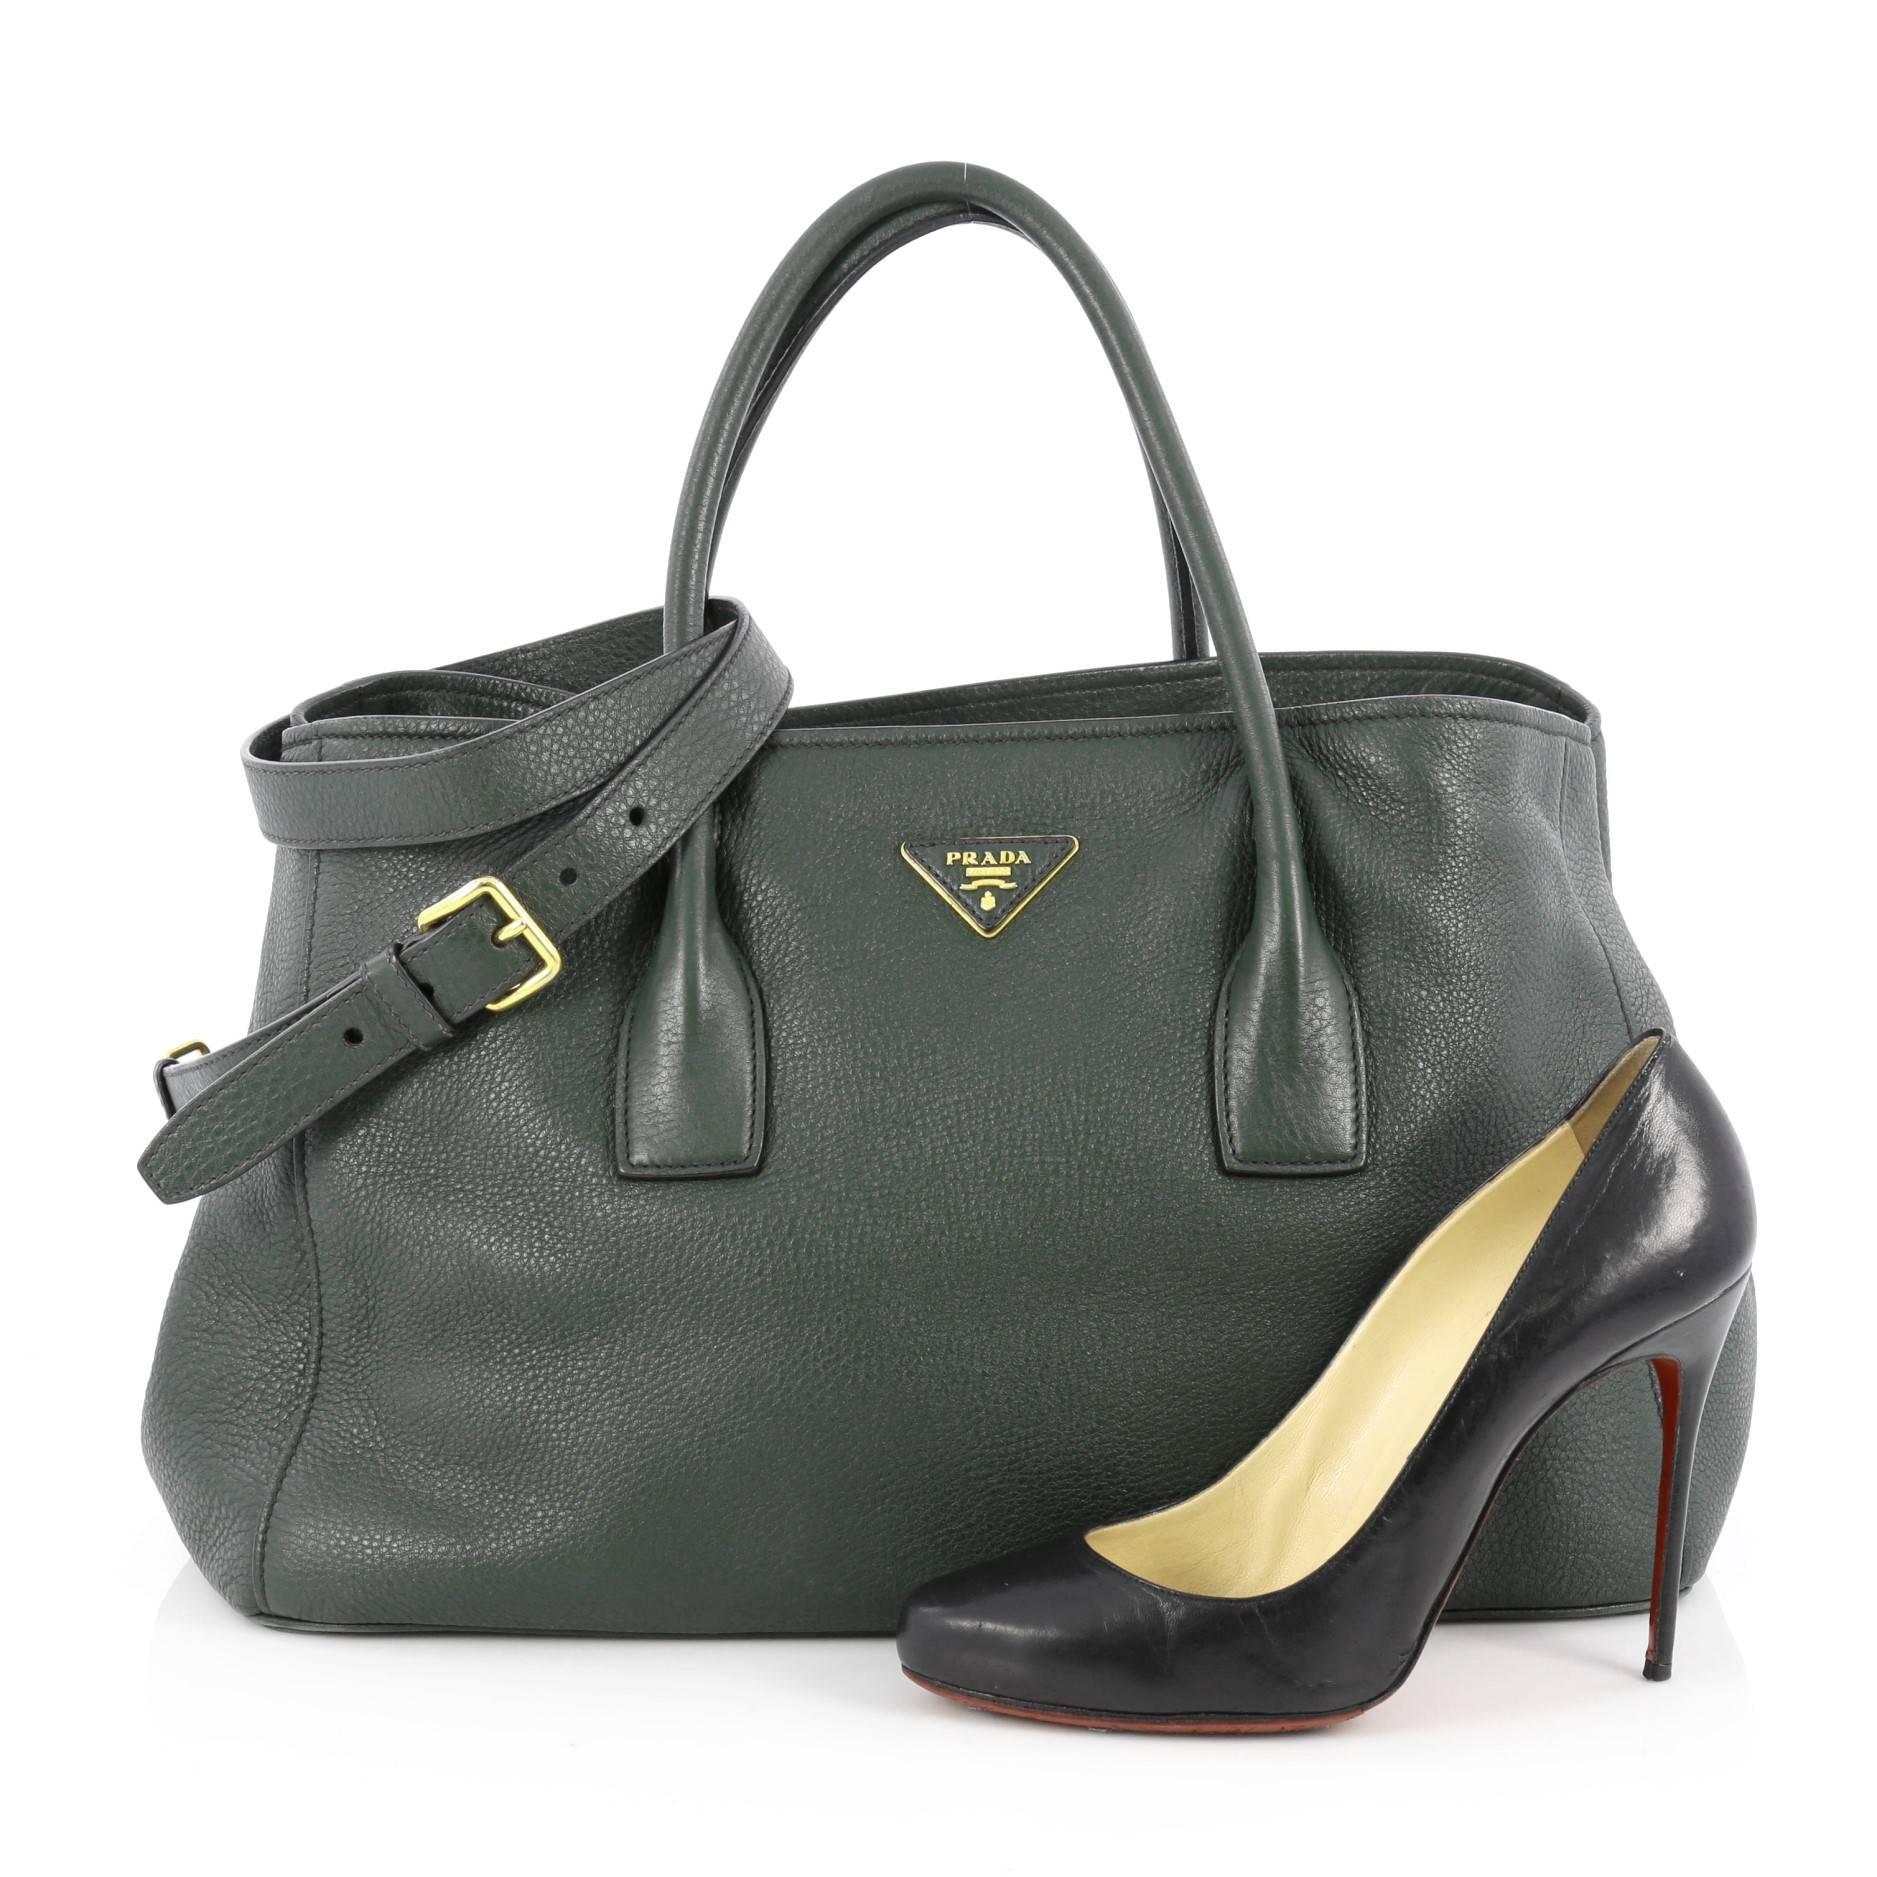 This authentic Prada East West Convertible Tote Vitello Daino Medium is elegant in its simplicity and structure. Crafted from green vitello daino leather, this tote features dual-rolled leather handles, sides with snap closures, raised Prada logo,